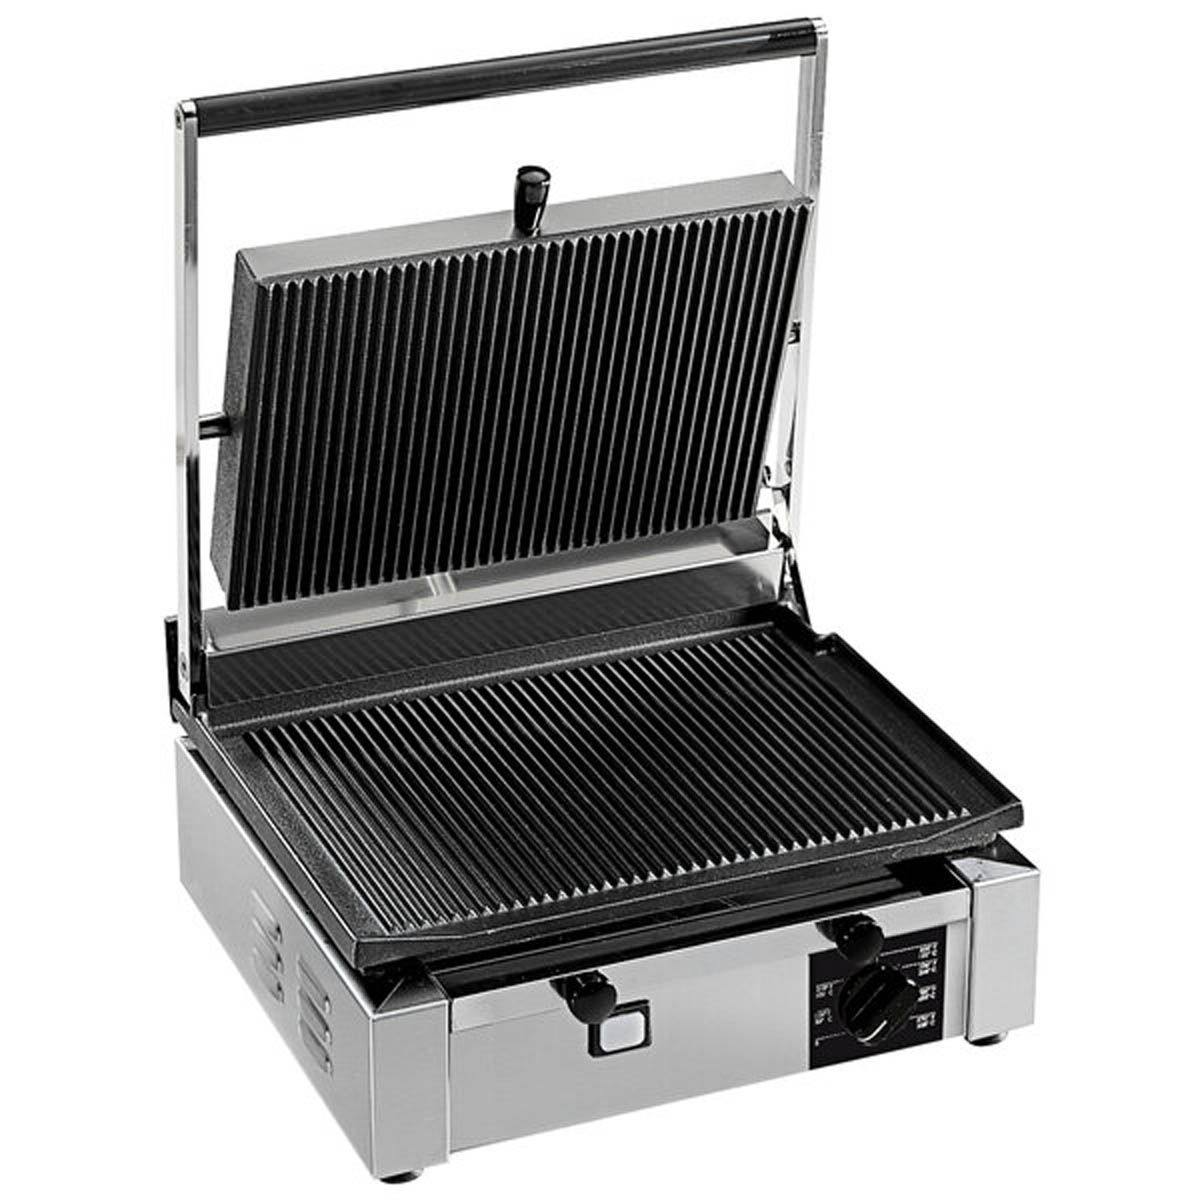 USA CORT-R-110 15" and Sandwich Grill